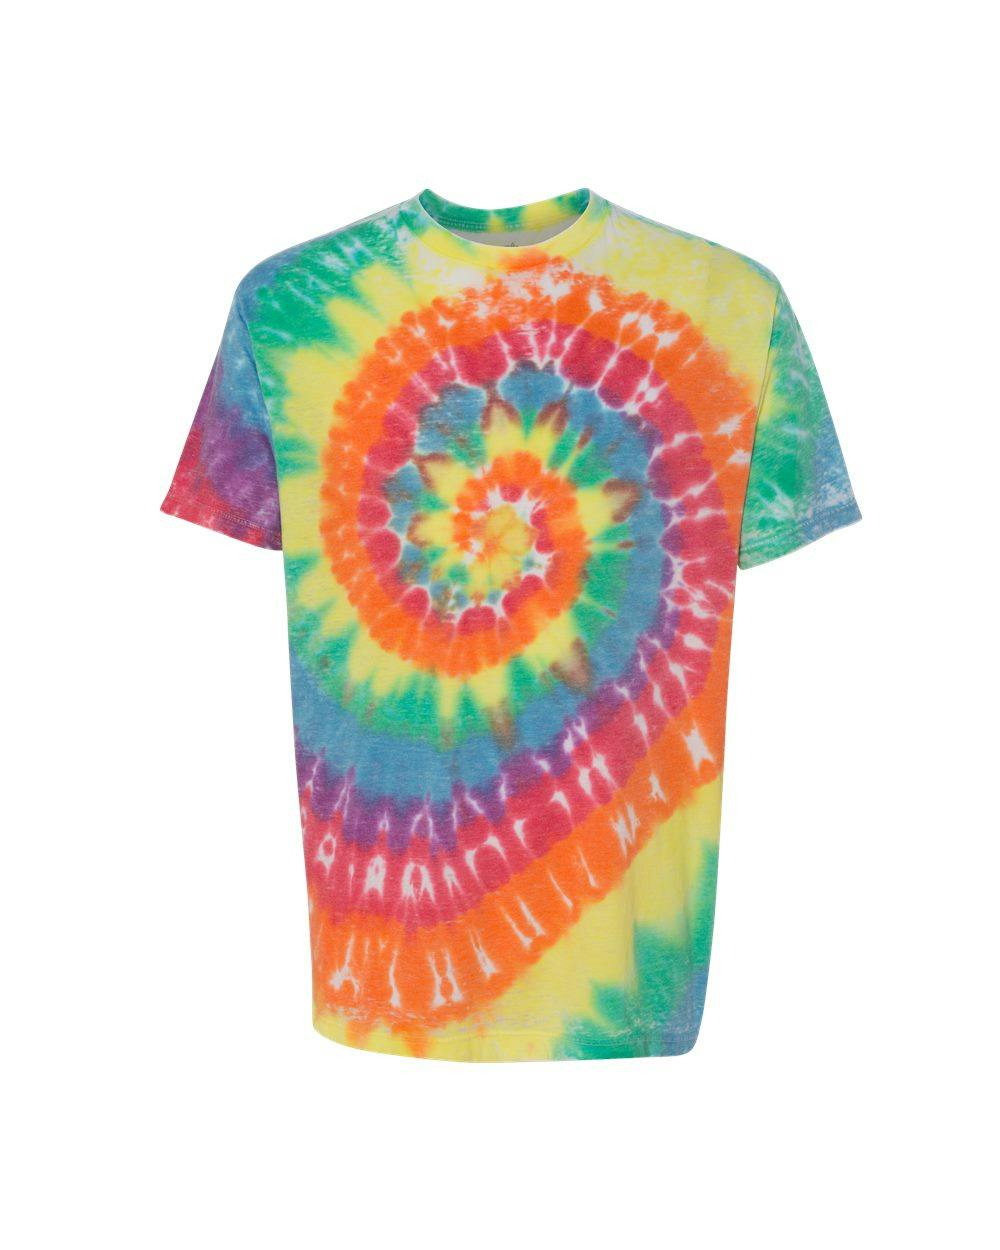 Image for Vintage Festival Tie-Dyed T-Shirt - 650VRX